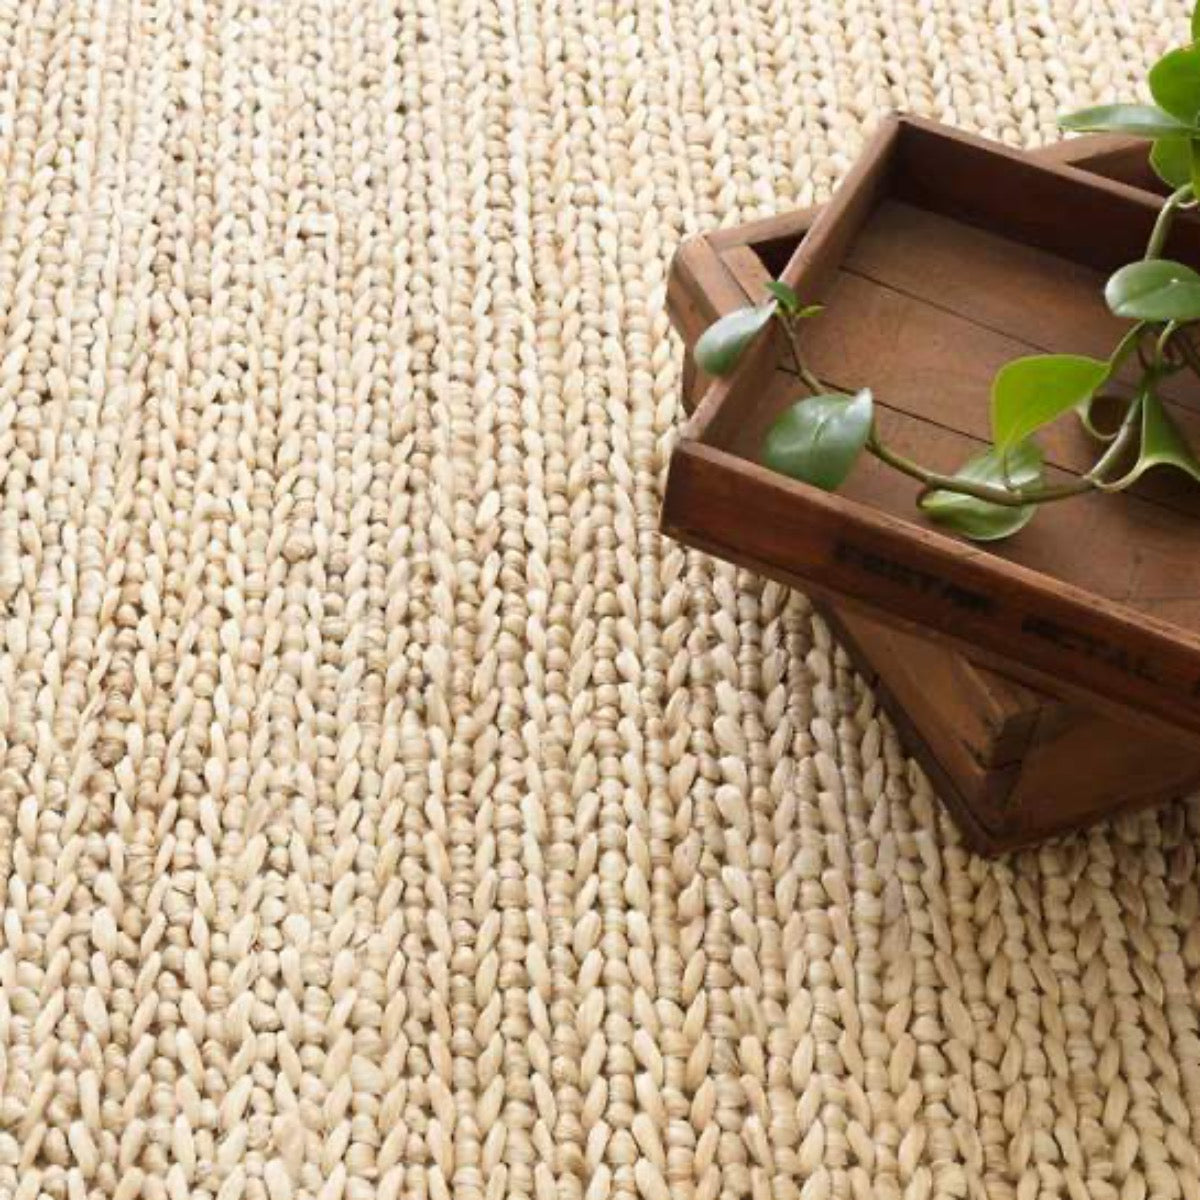 Jute Woven Natural Rug. Top view.